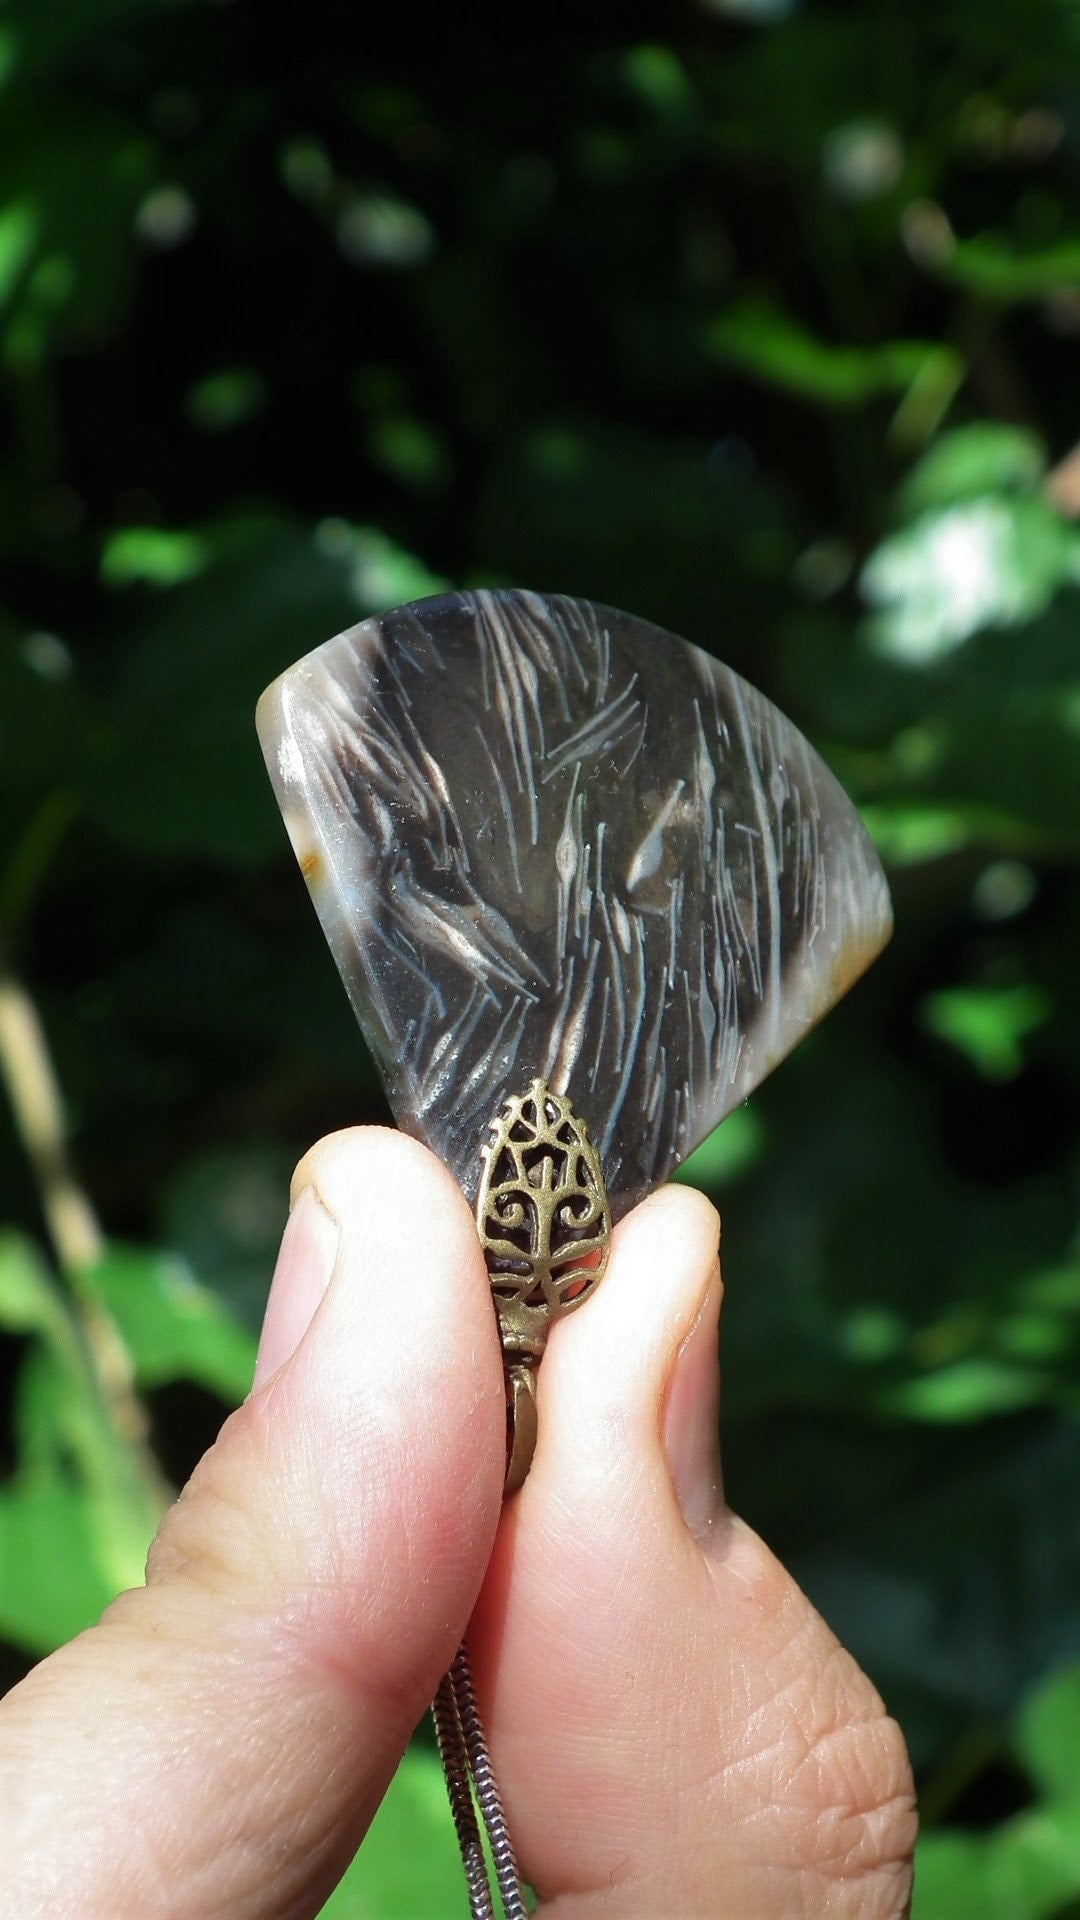 Feather Agate pendant with bronze bail